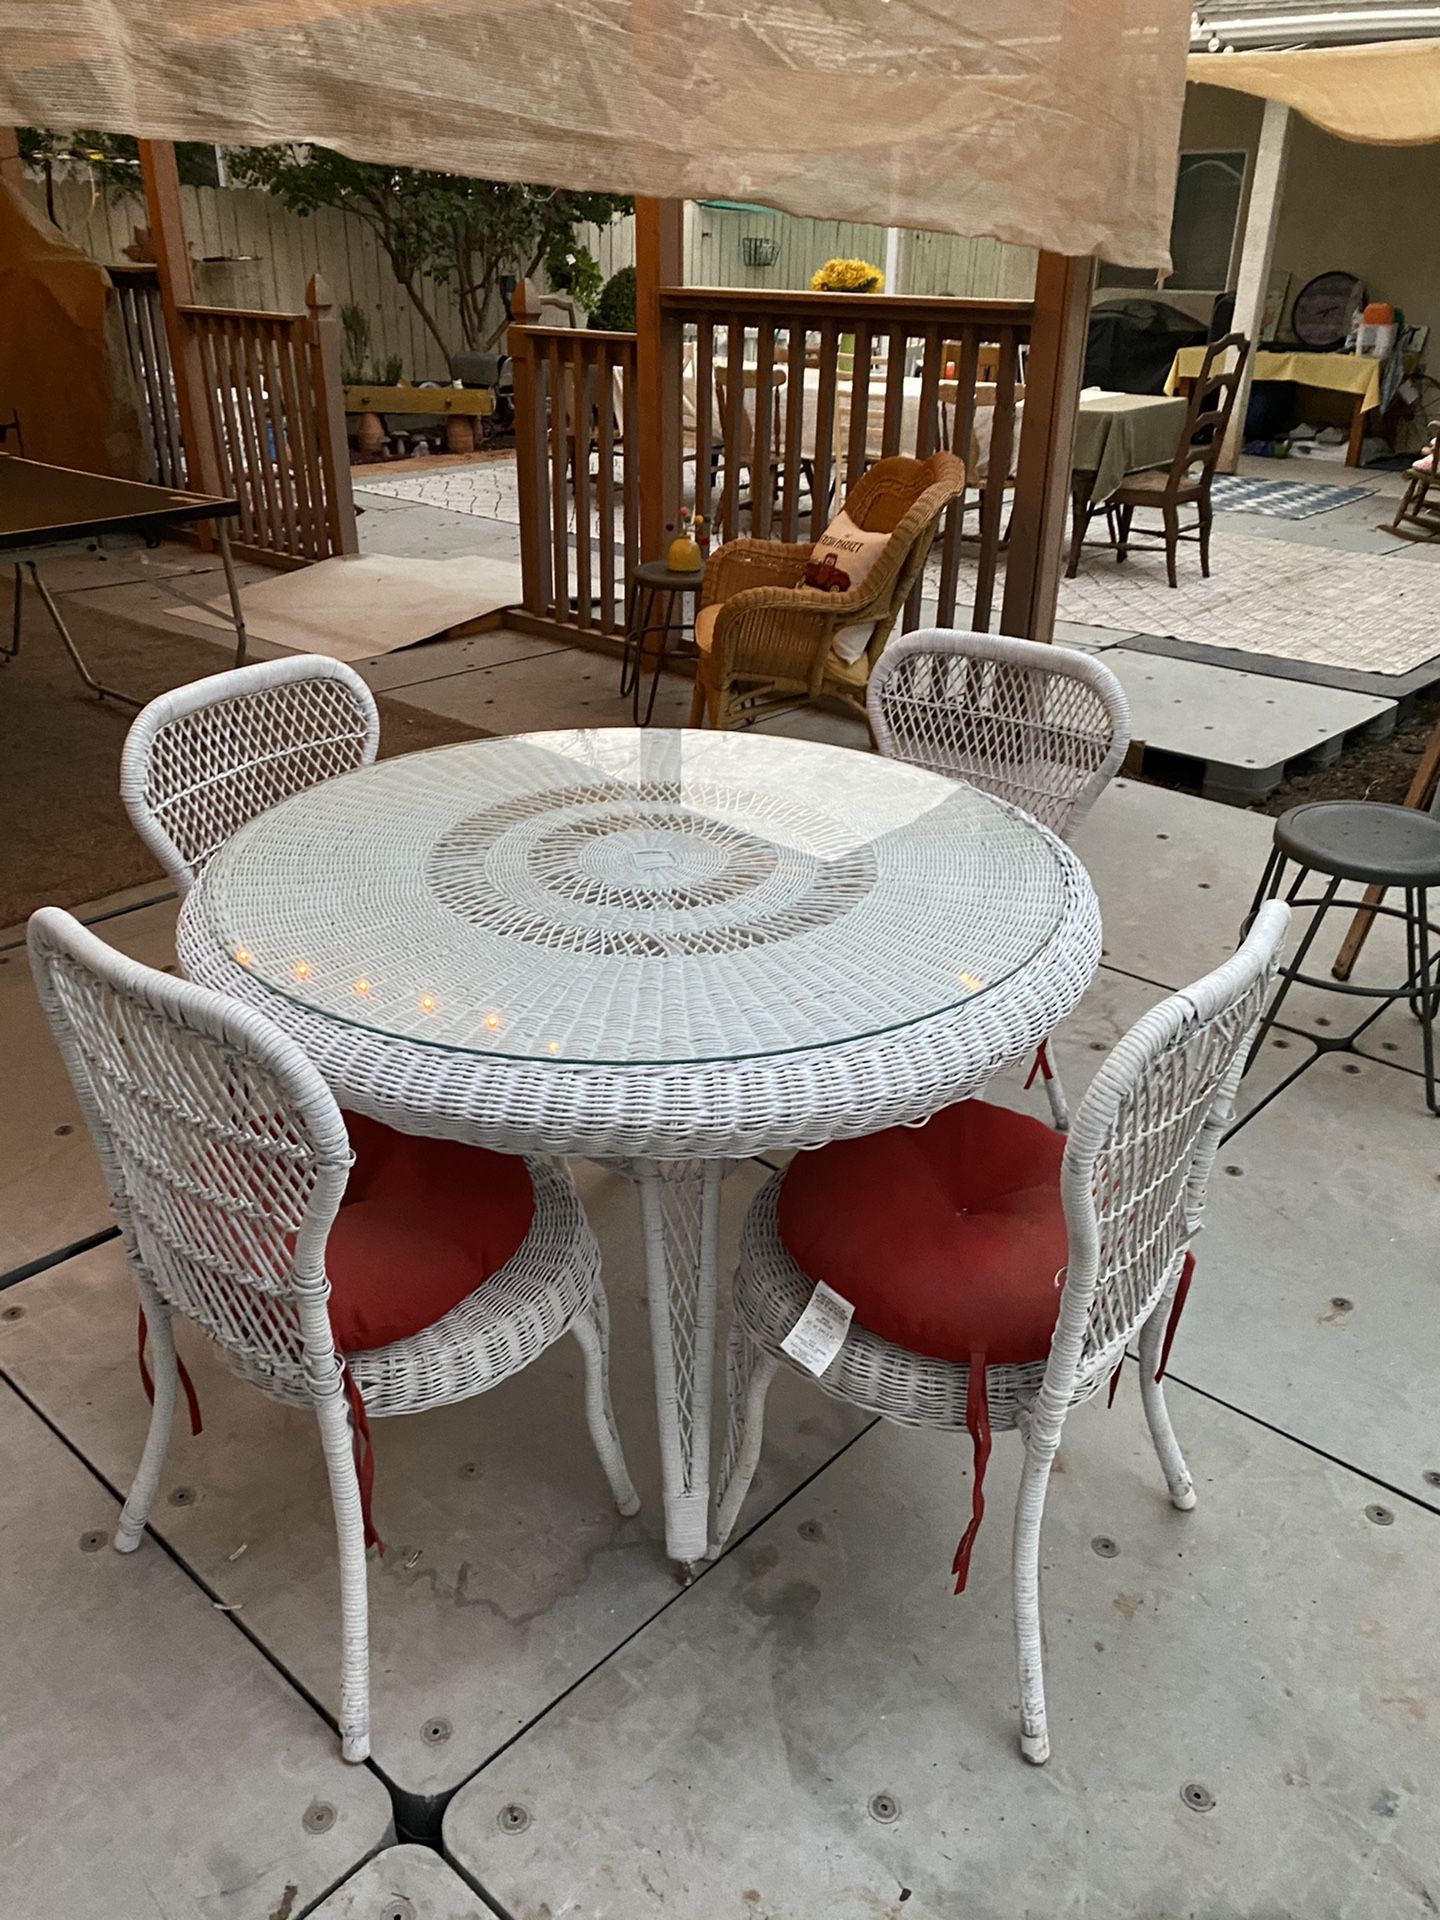 Wicker table and 4 chairs with glass top and new cushions